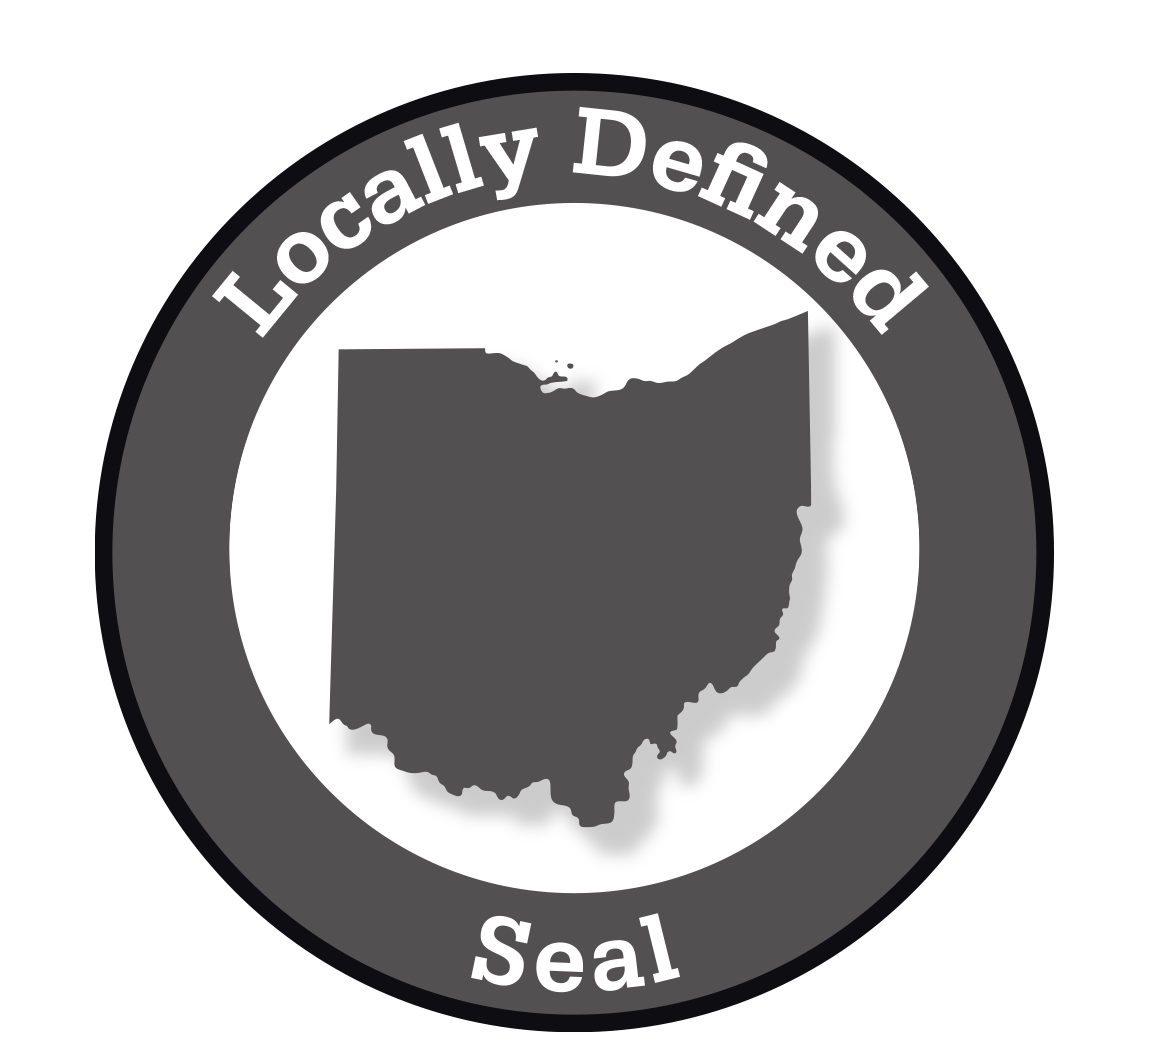 Locally Defined seal